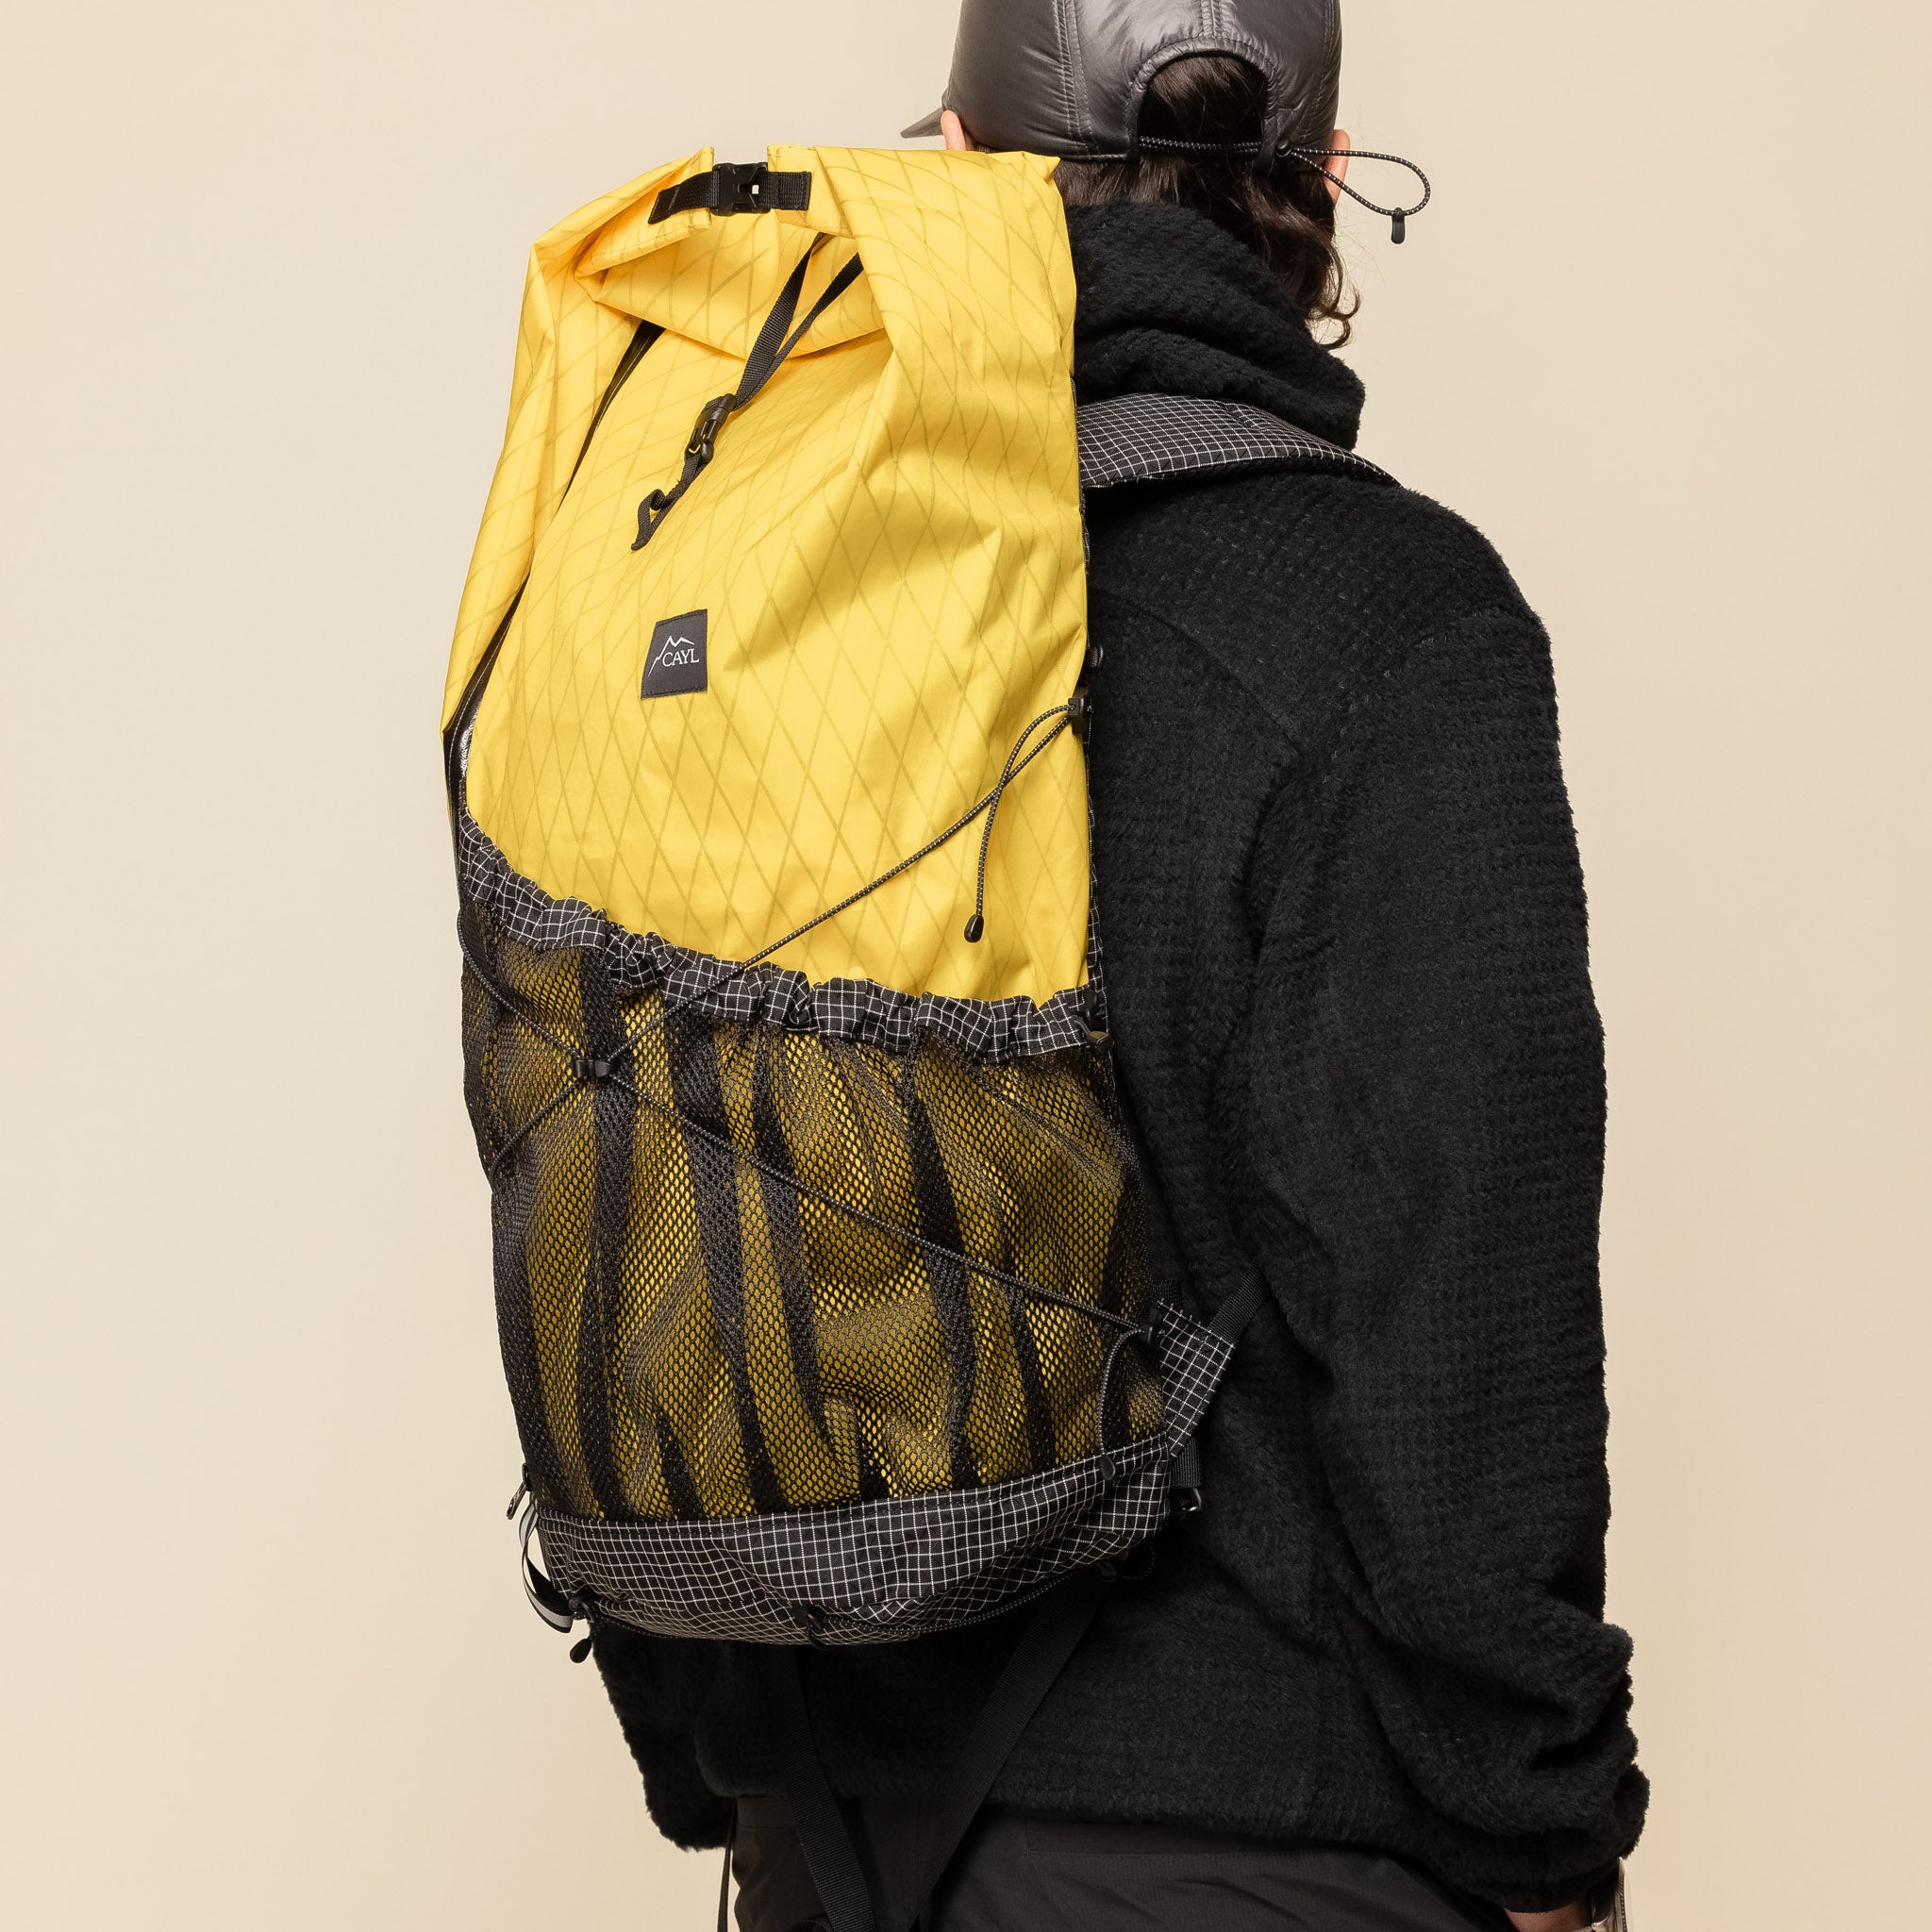 CAYL "Climb As You Love" - Mari Roll Top Backpack - Yellow X-Pac "cayl stockists" "cayl backpack" "climb as you love"